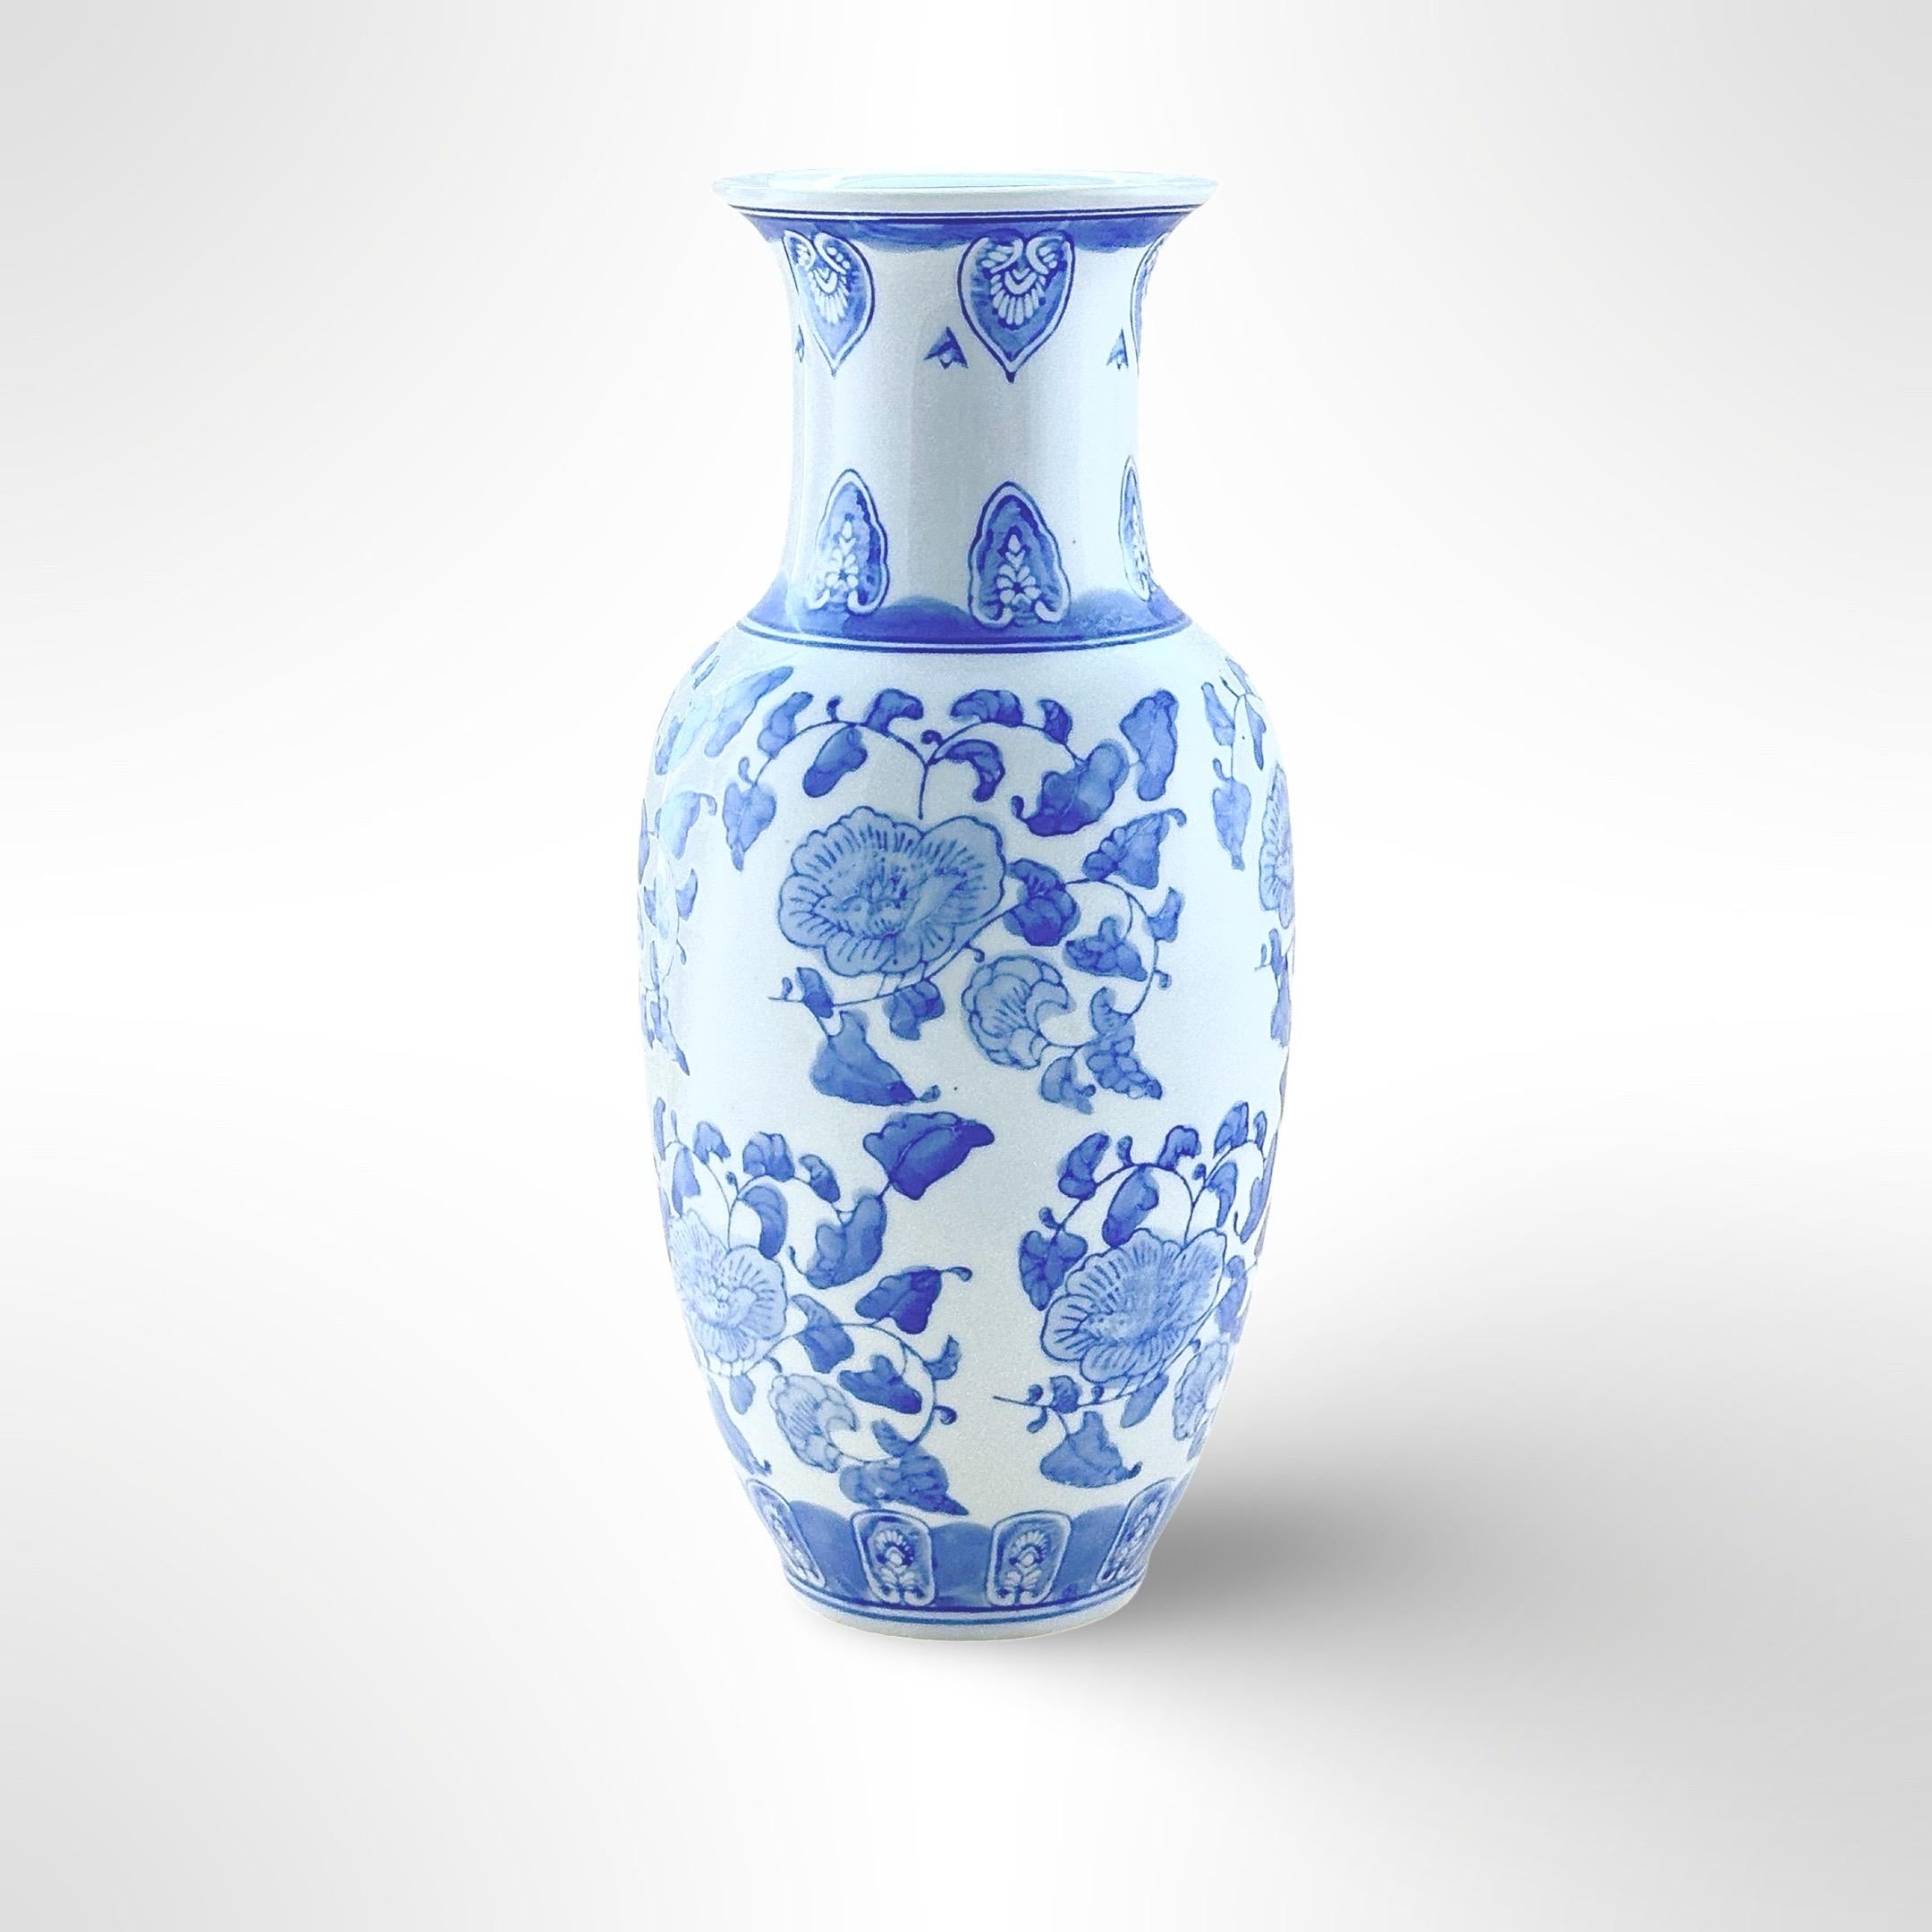 A vintage 'Ming style' baluster vase. Created around the mid to latter half of the 20th Century in China. 

A classical representation of the much revered blue and white glazed porcelain that was crafted during the Ming dynasty. The vase has been